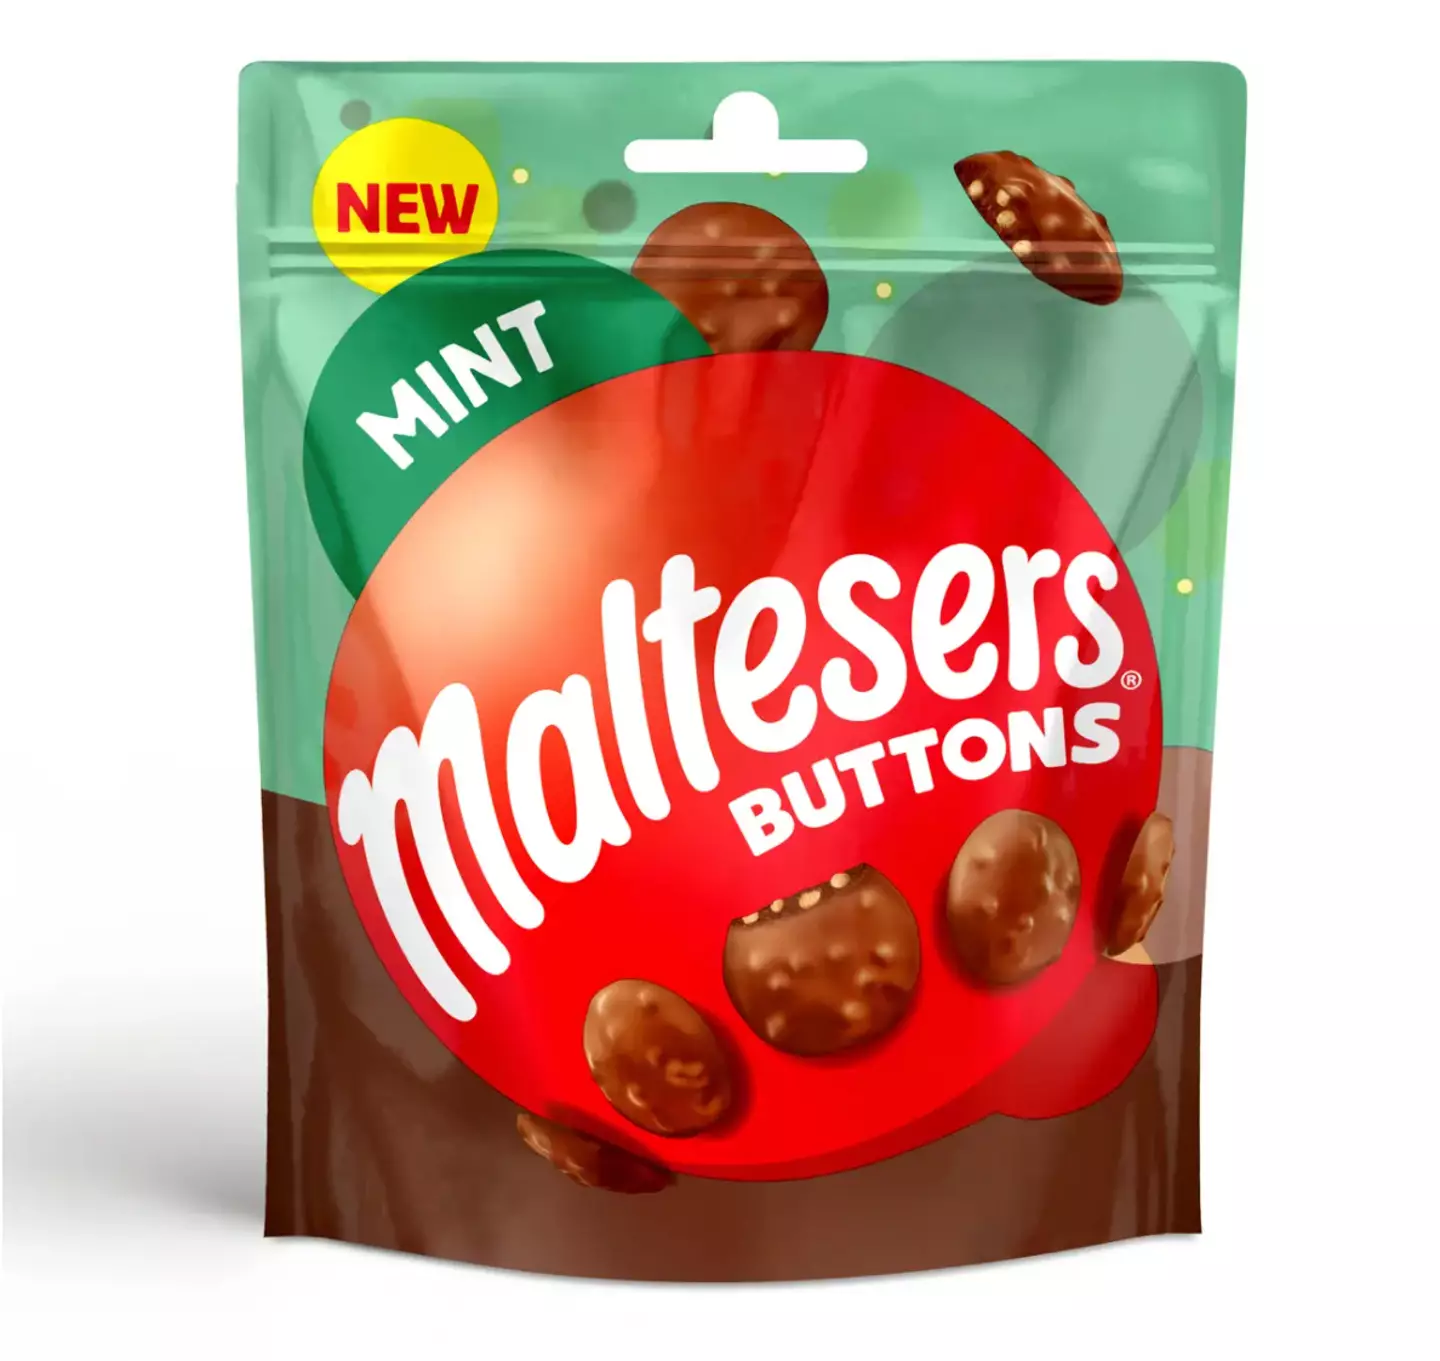 Maltesers buttons are also available in mint (